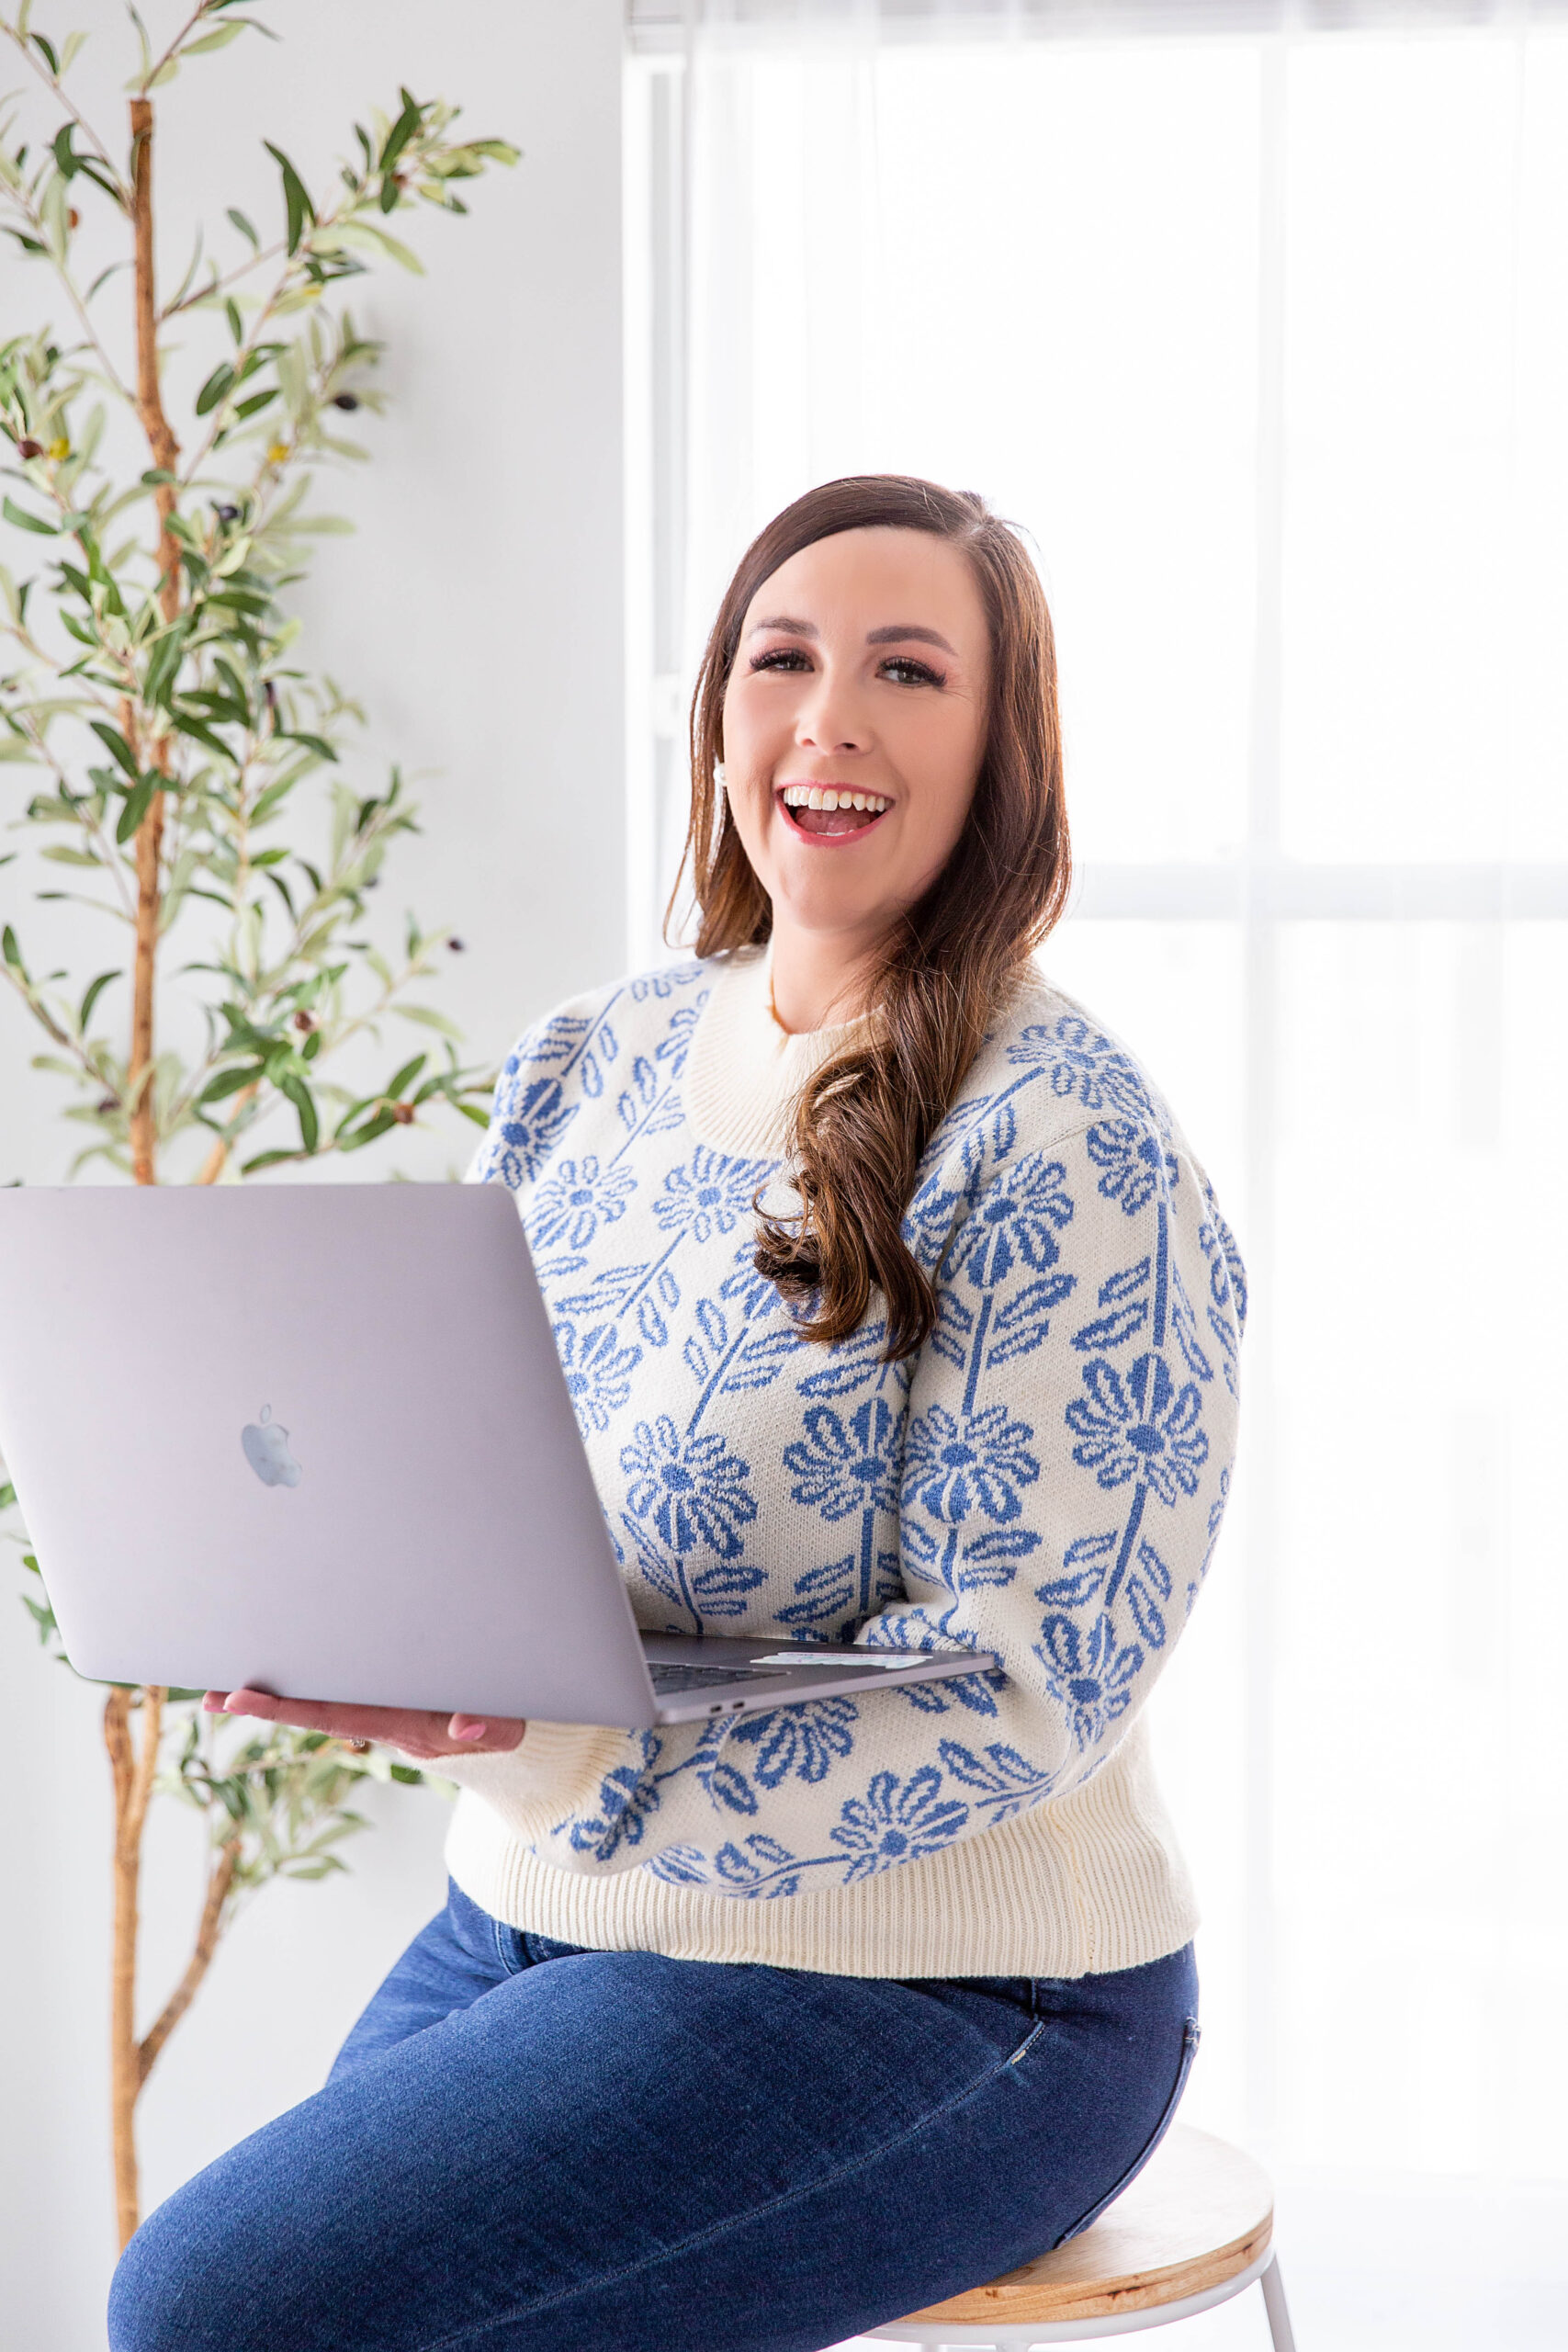 Magan holding her laptop | How a Bundle Helped Grow Our Email Lists | Magan Ward